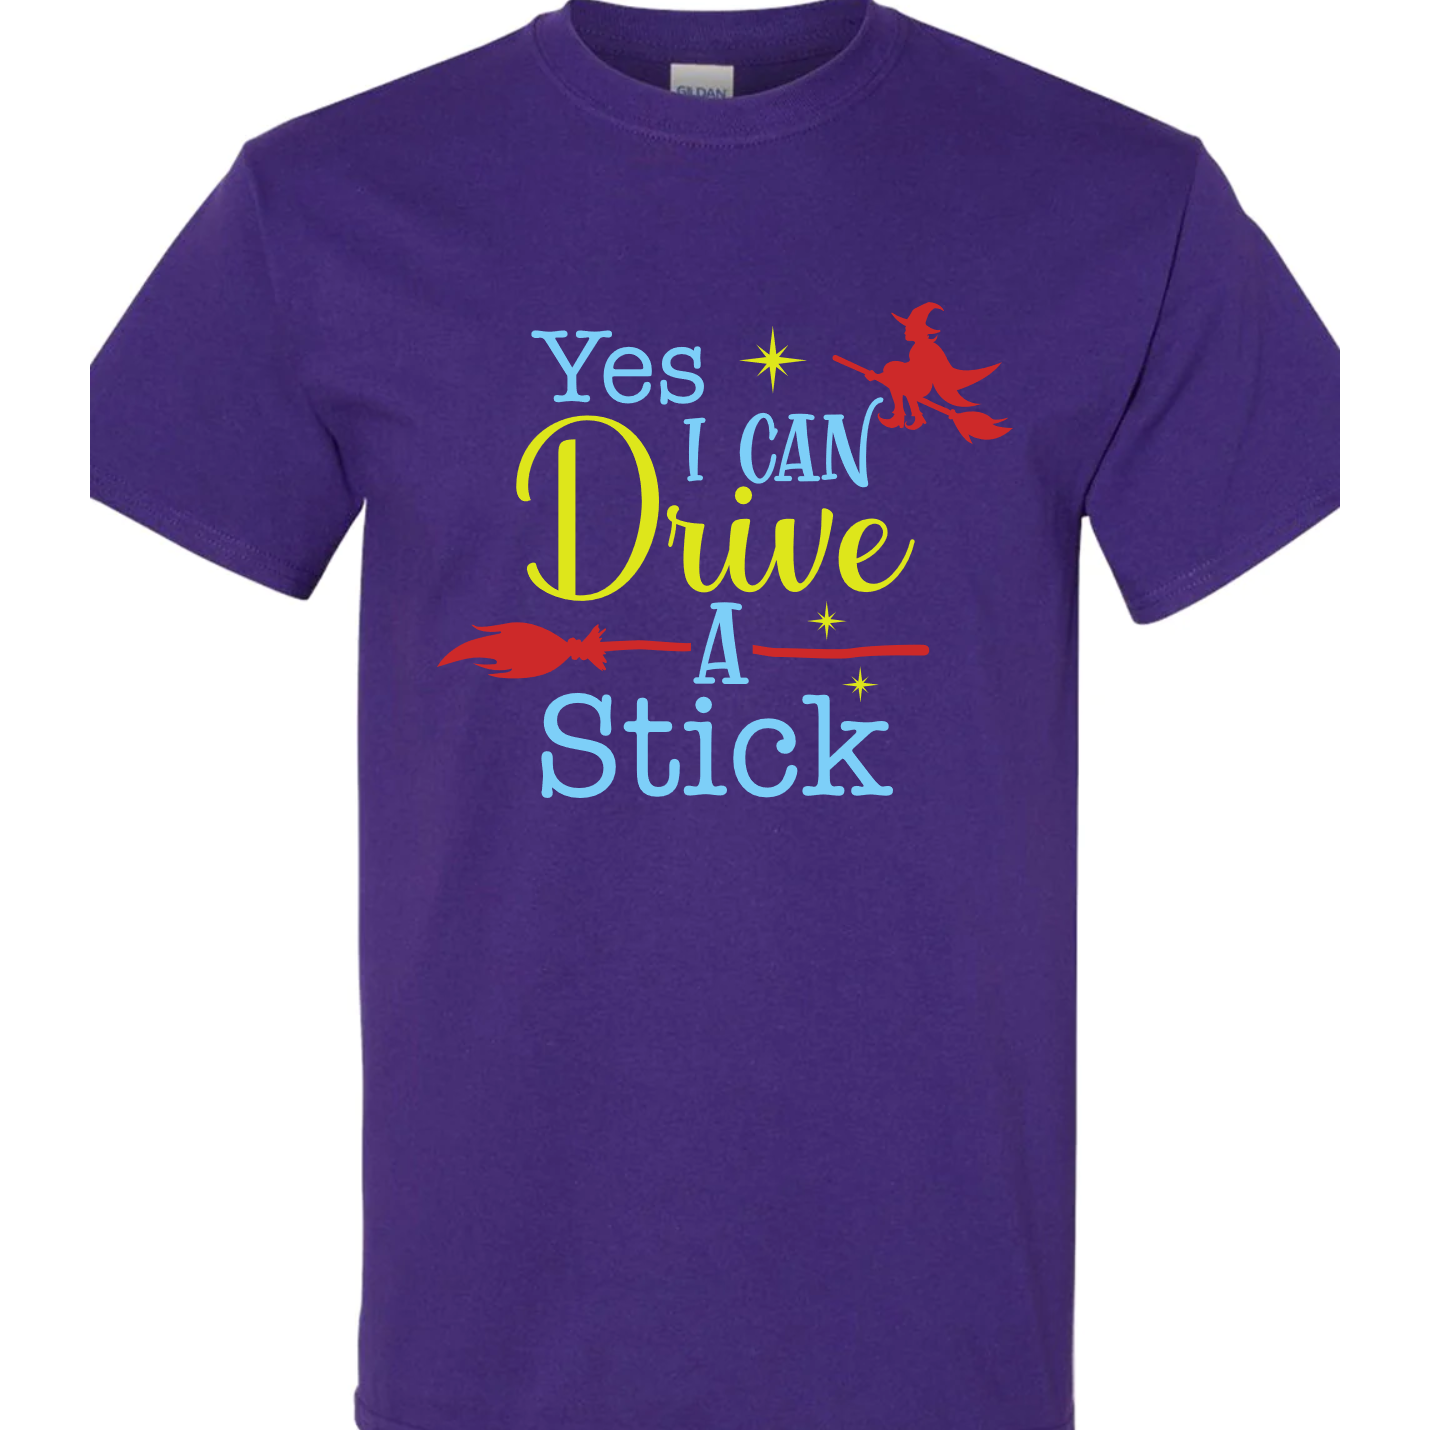 Yes I can Drive a Stick Vinyl Graphic for Shirts